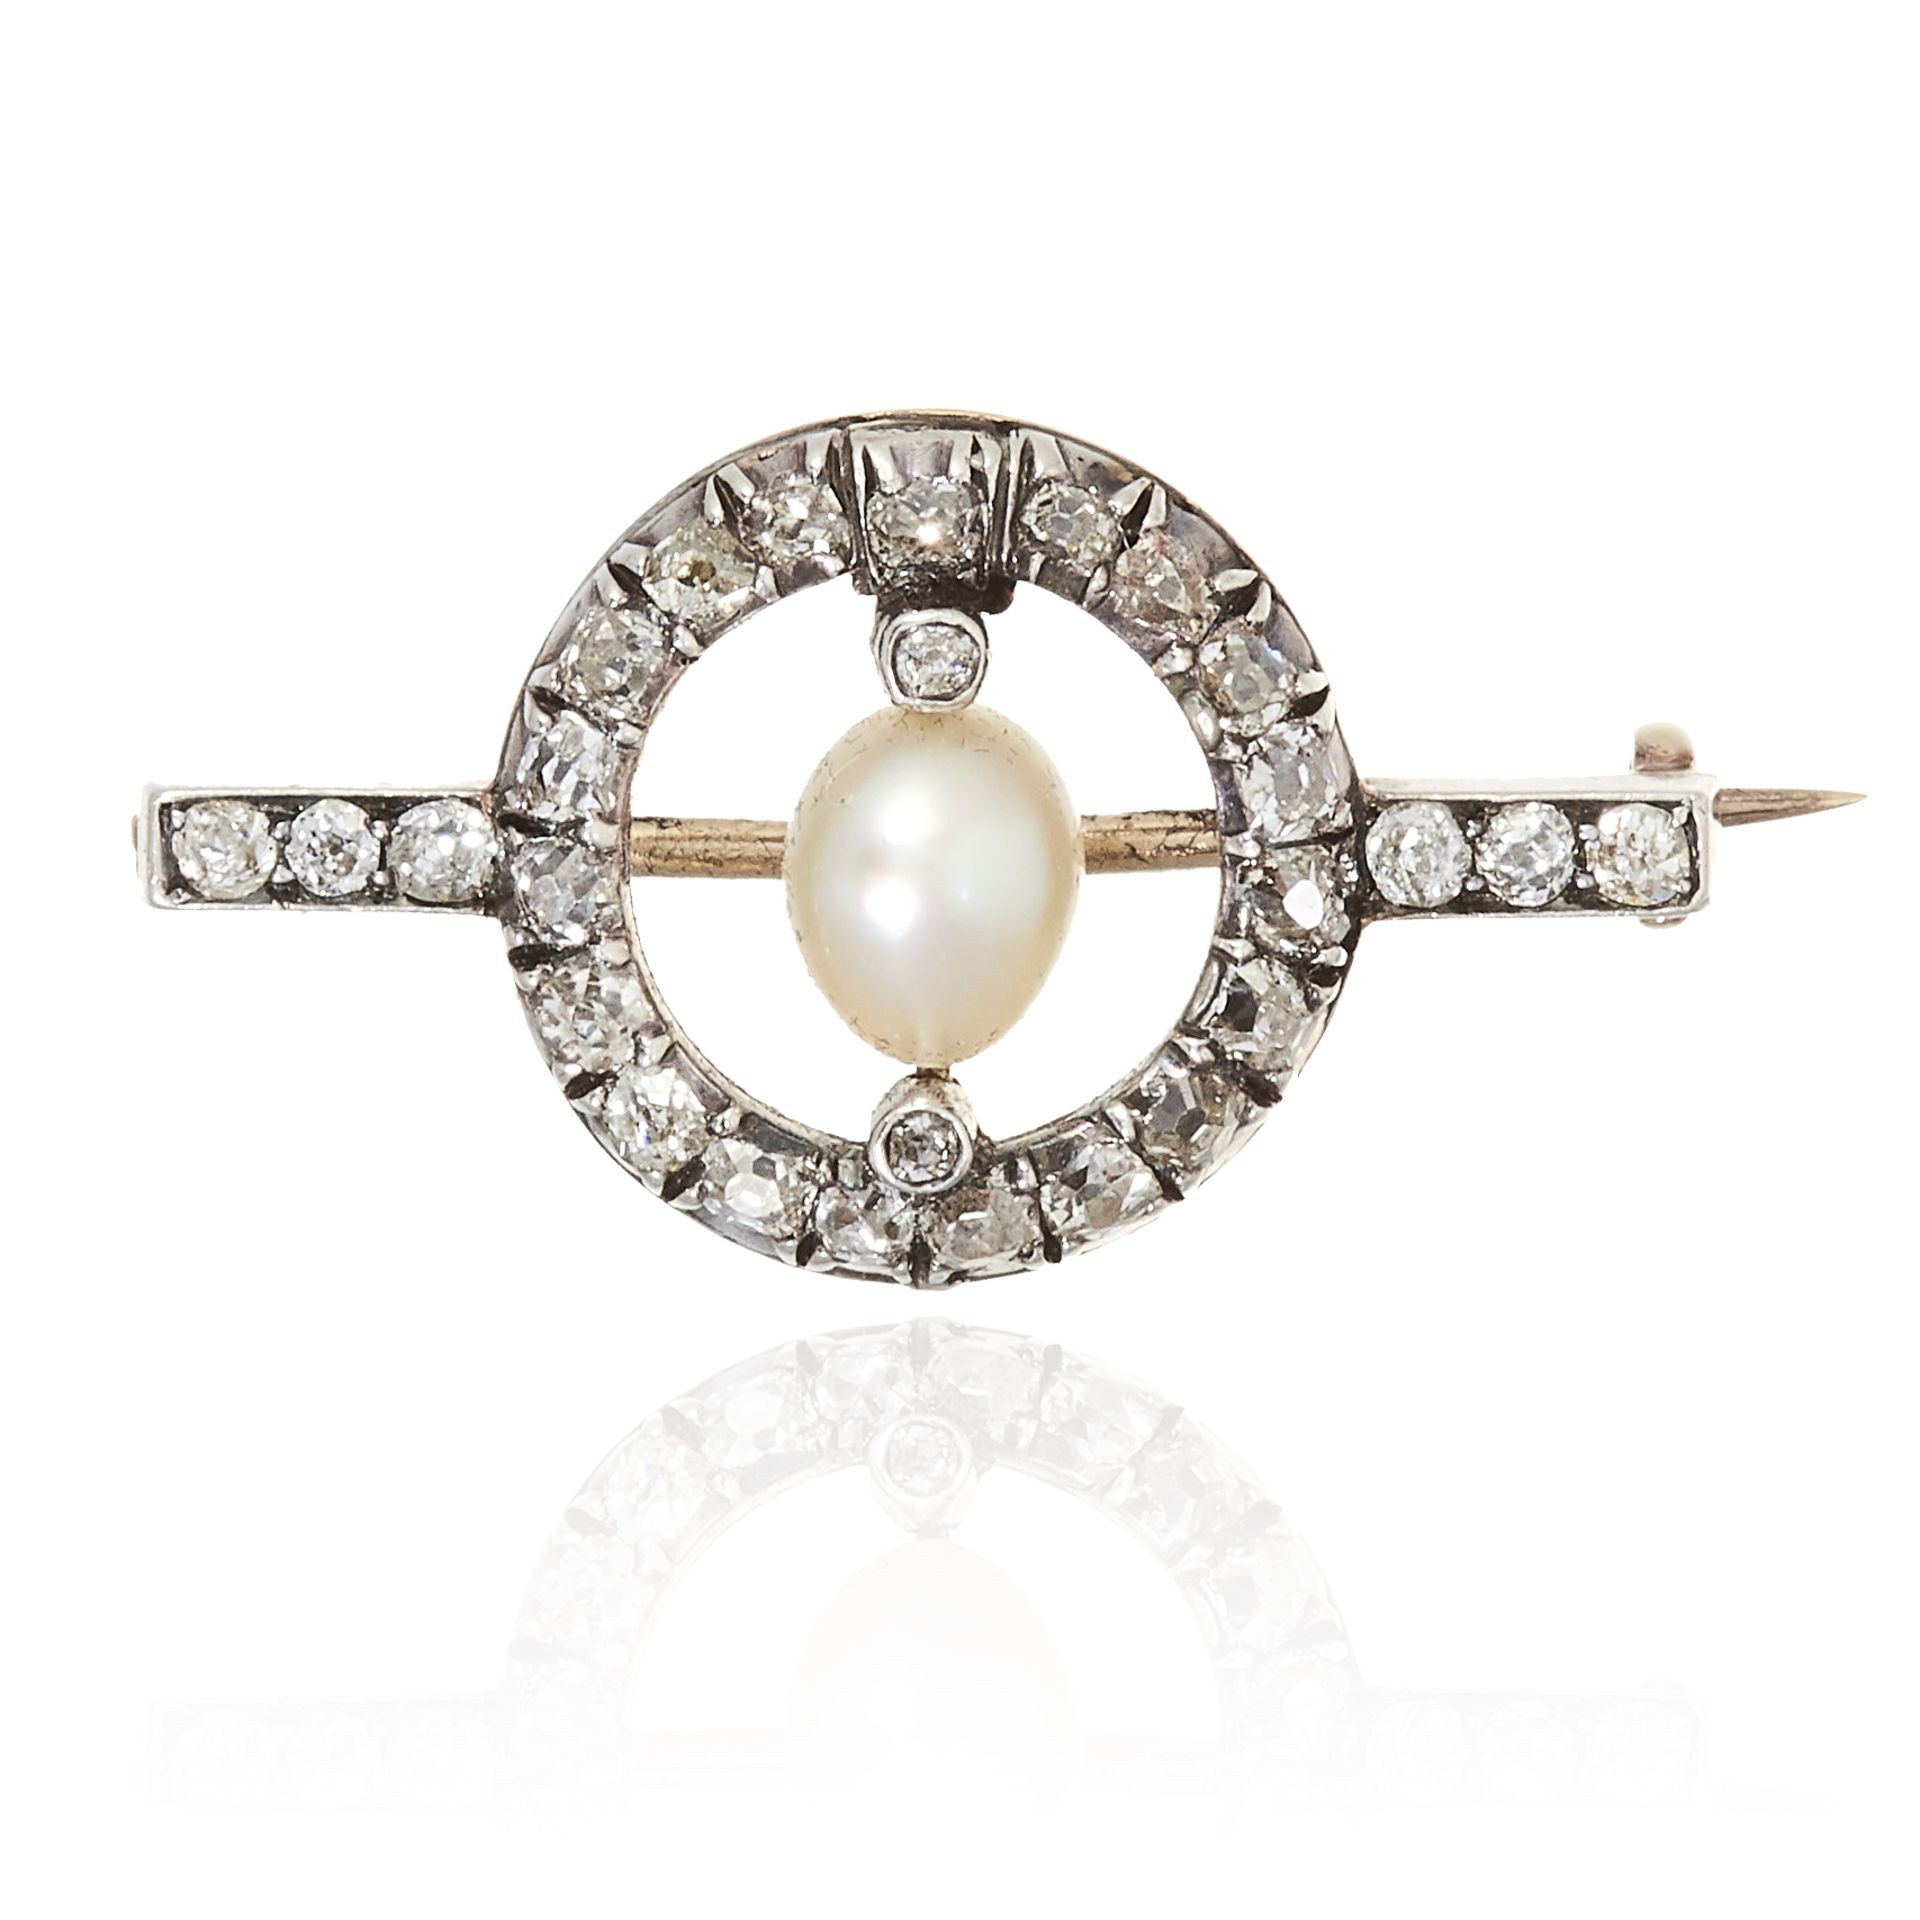 AN ANTIQUE NATURAL PEARL AND DIAMOND BROOCH in gold or platinum, comprising of central pearl